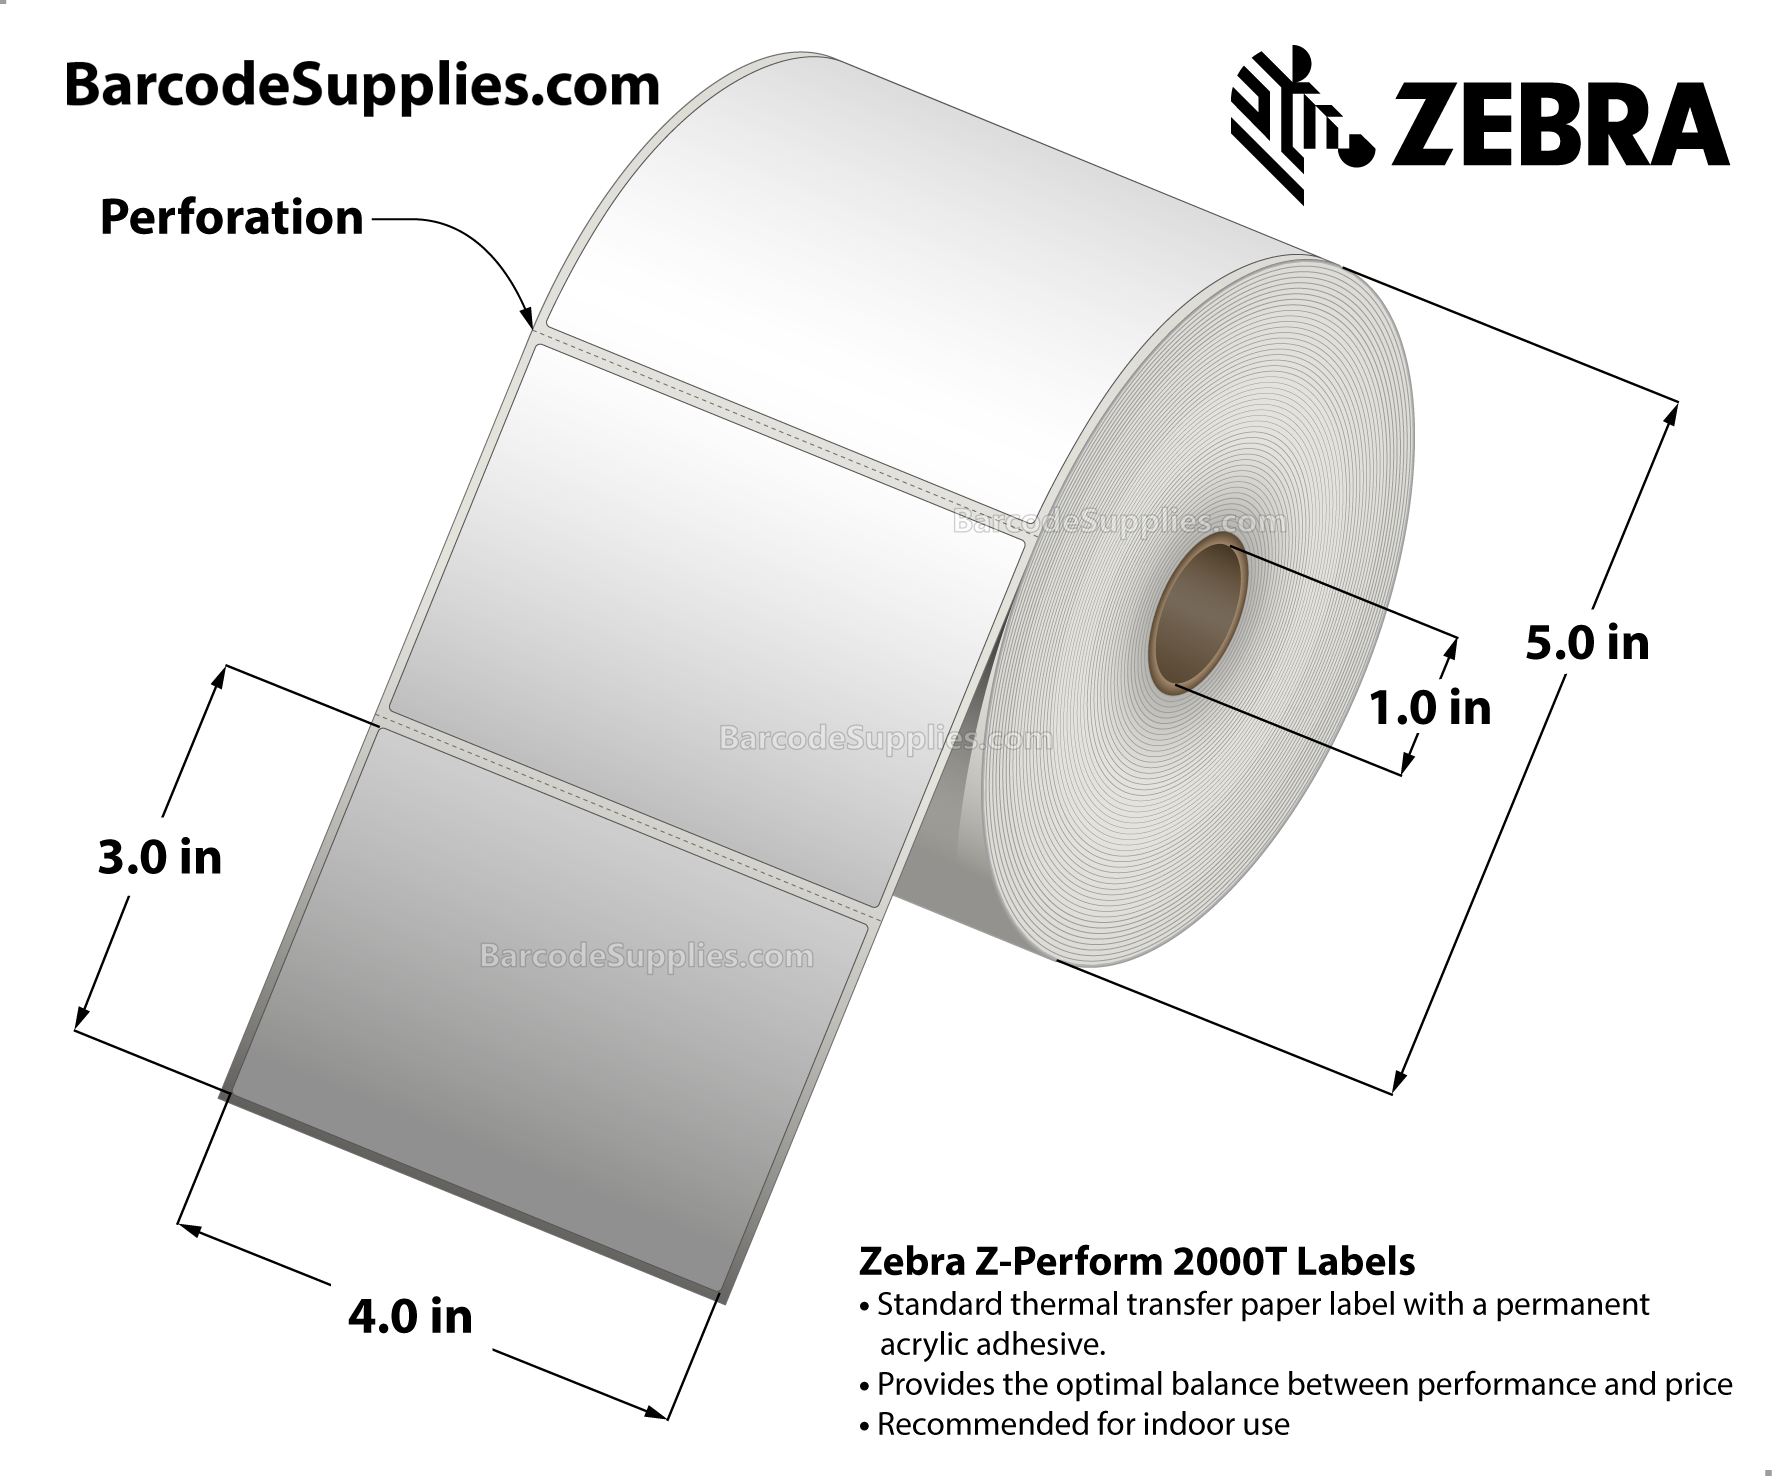 4 x 3 Thermal Transfer White Z-Perform 2000T Labels With Permanent Adhesive - Perforated - 890 Labels Per Roll - Carton Of 6 Rolls - 5340 Labels Total - MPN: 10005852